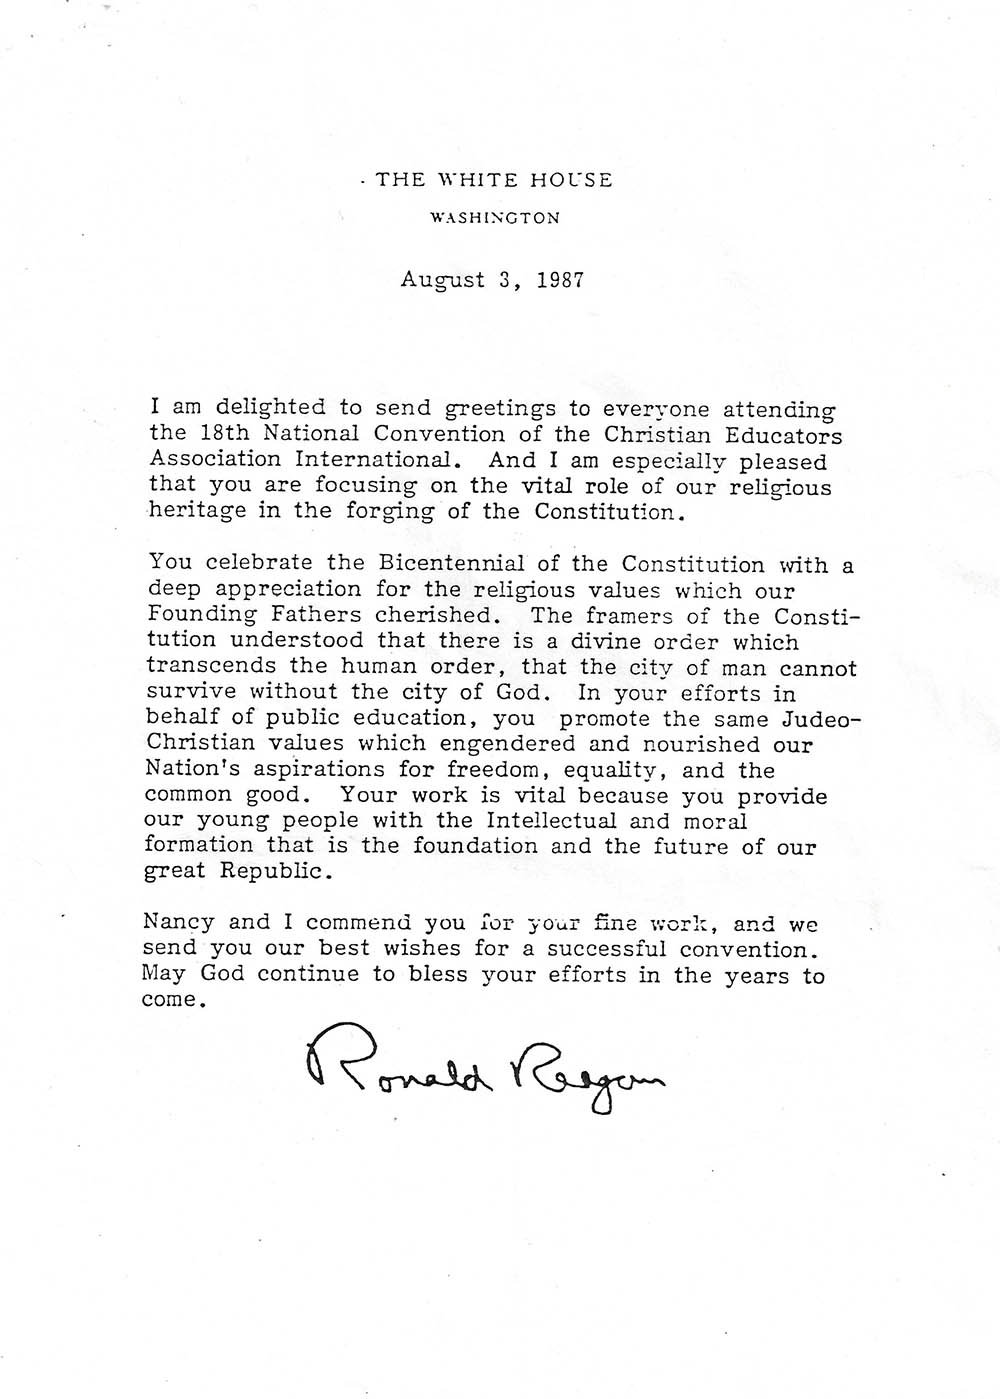 Letter from Ronald Reagan